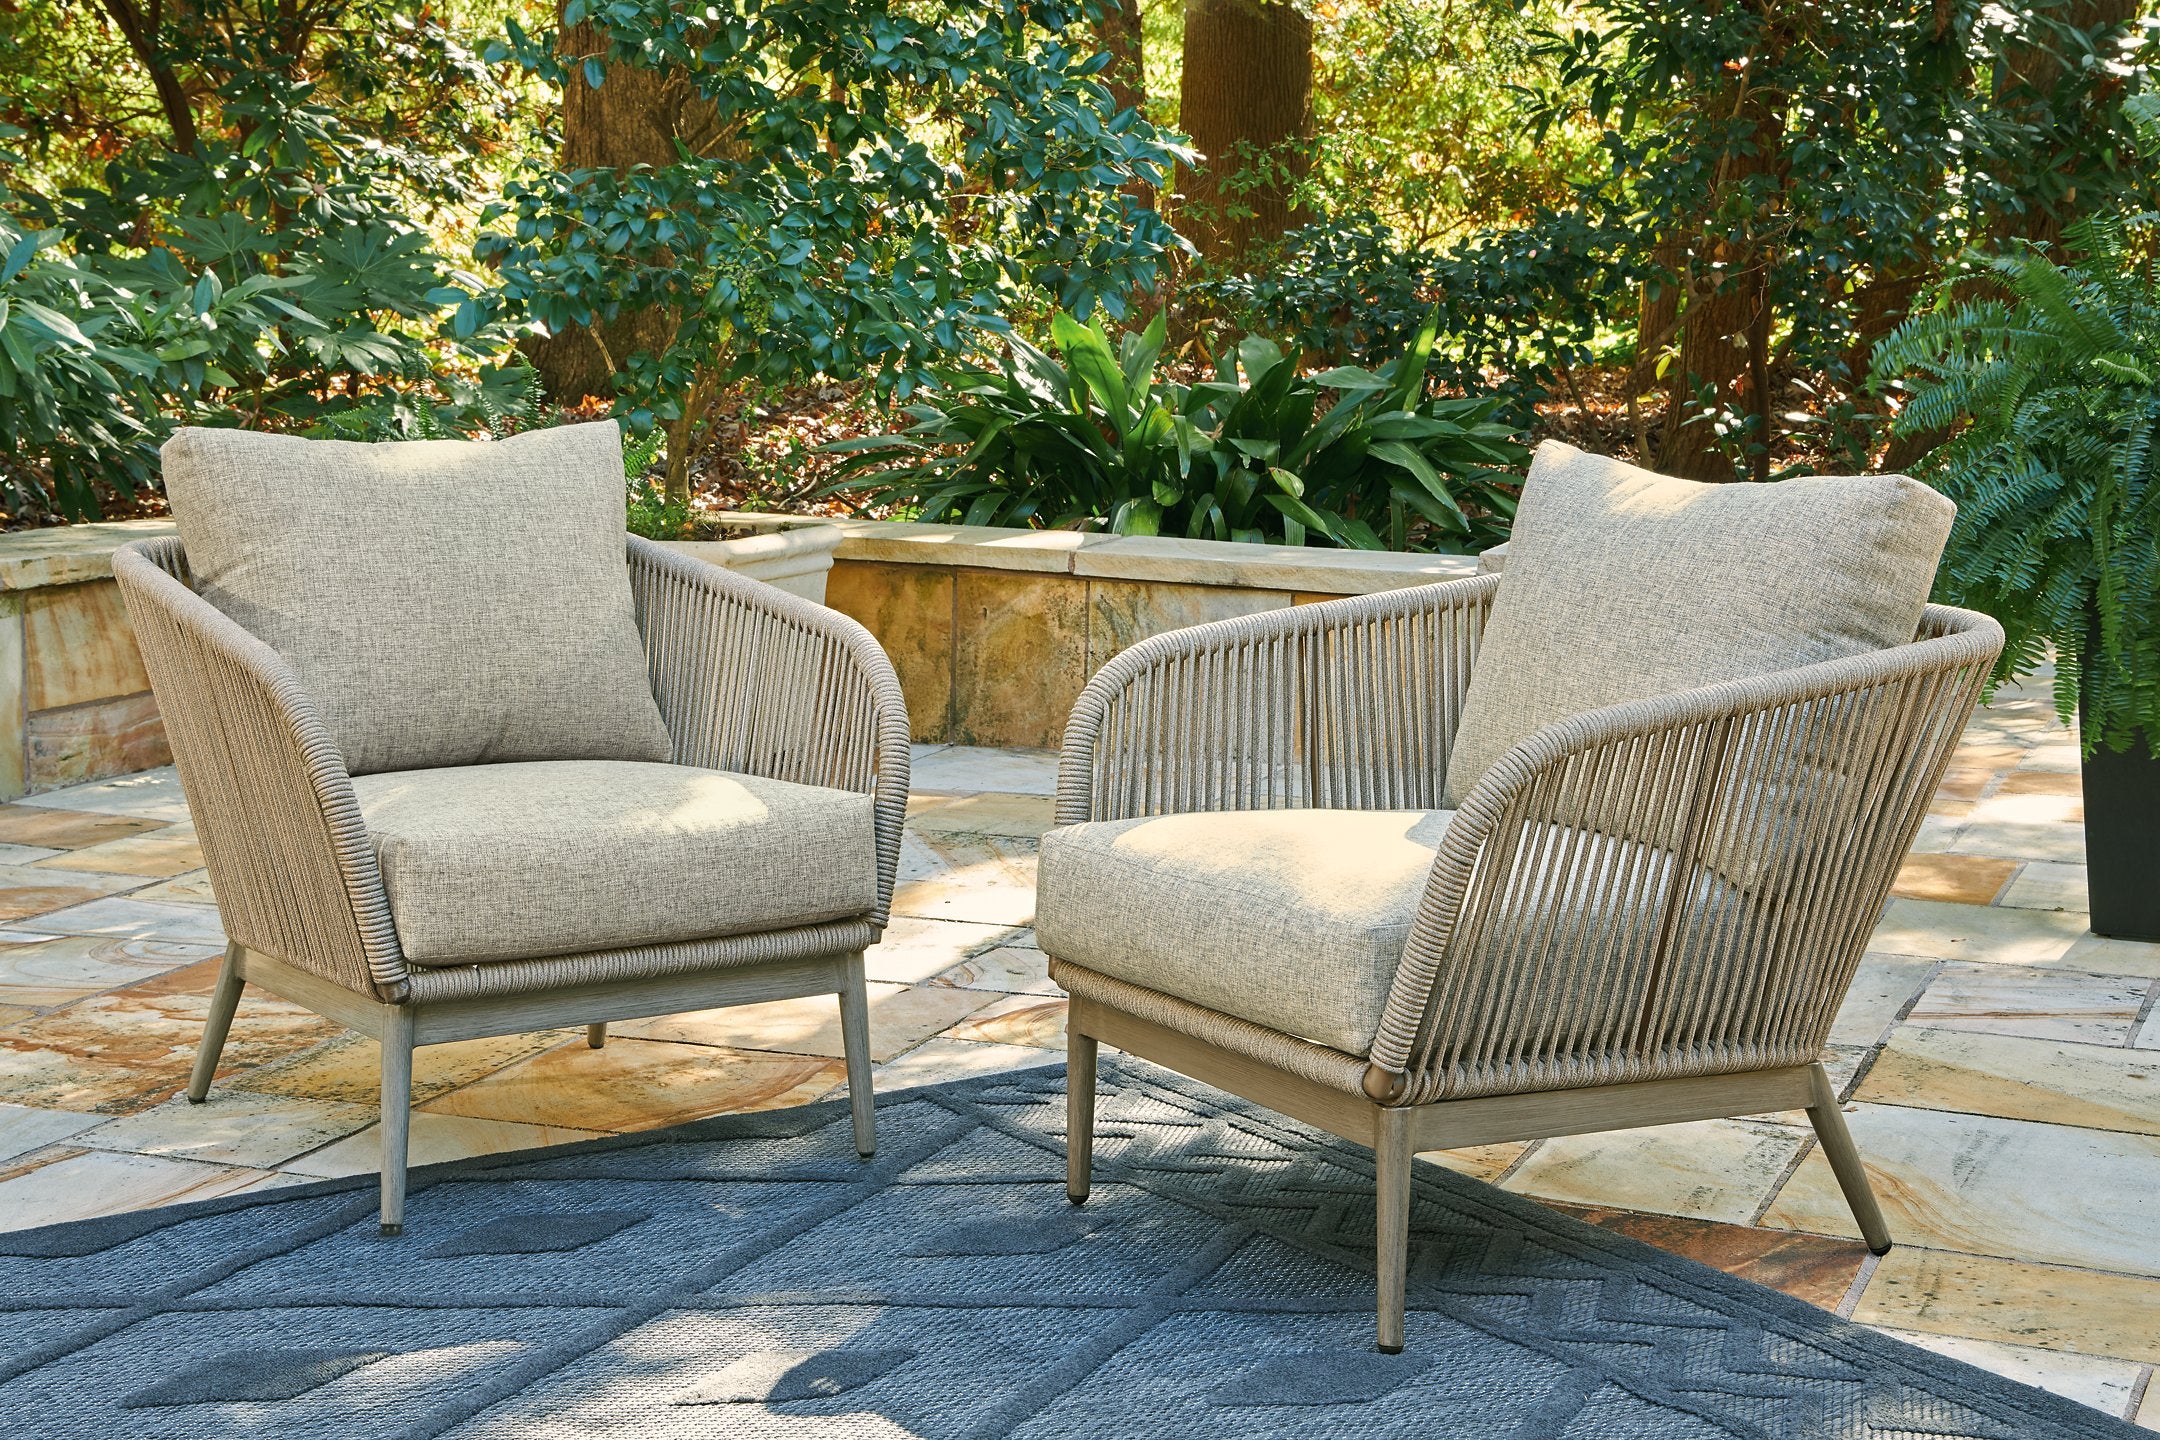 Swiss Valley Lounge Chair with Cushion (Set of 2)